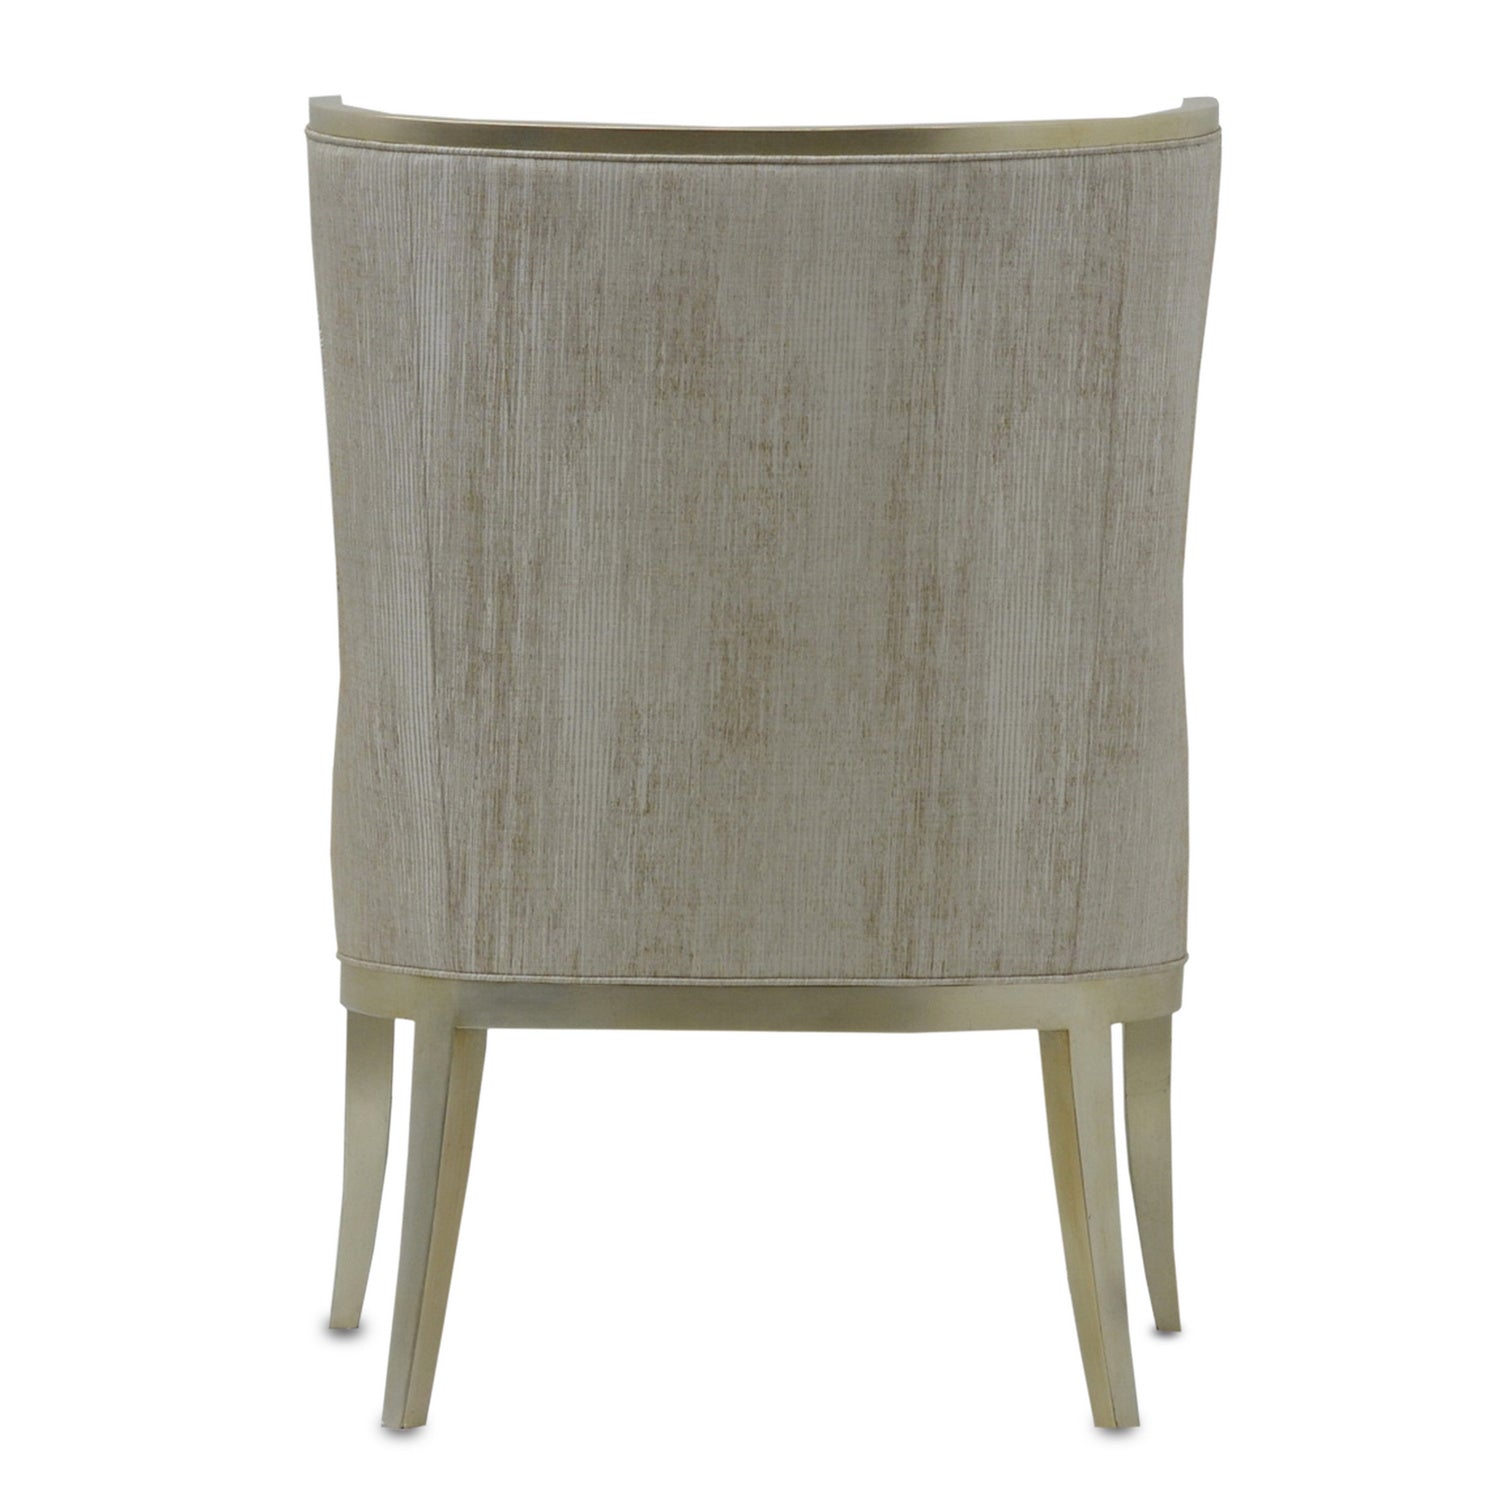 Chair from the Garson collection in Silver/Fresh File Linen finish